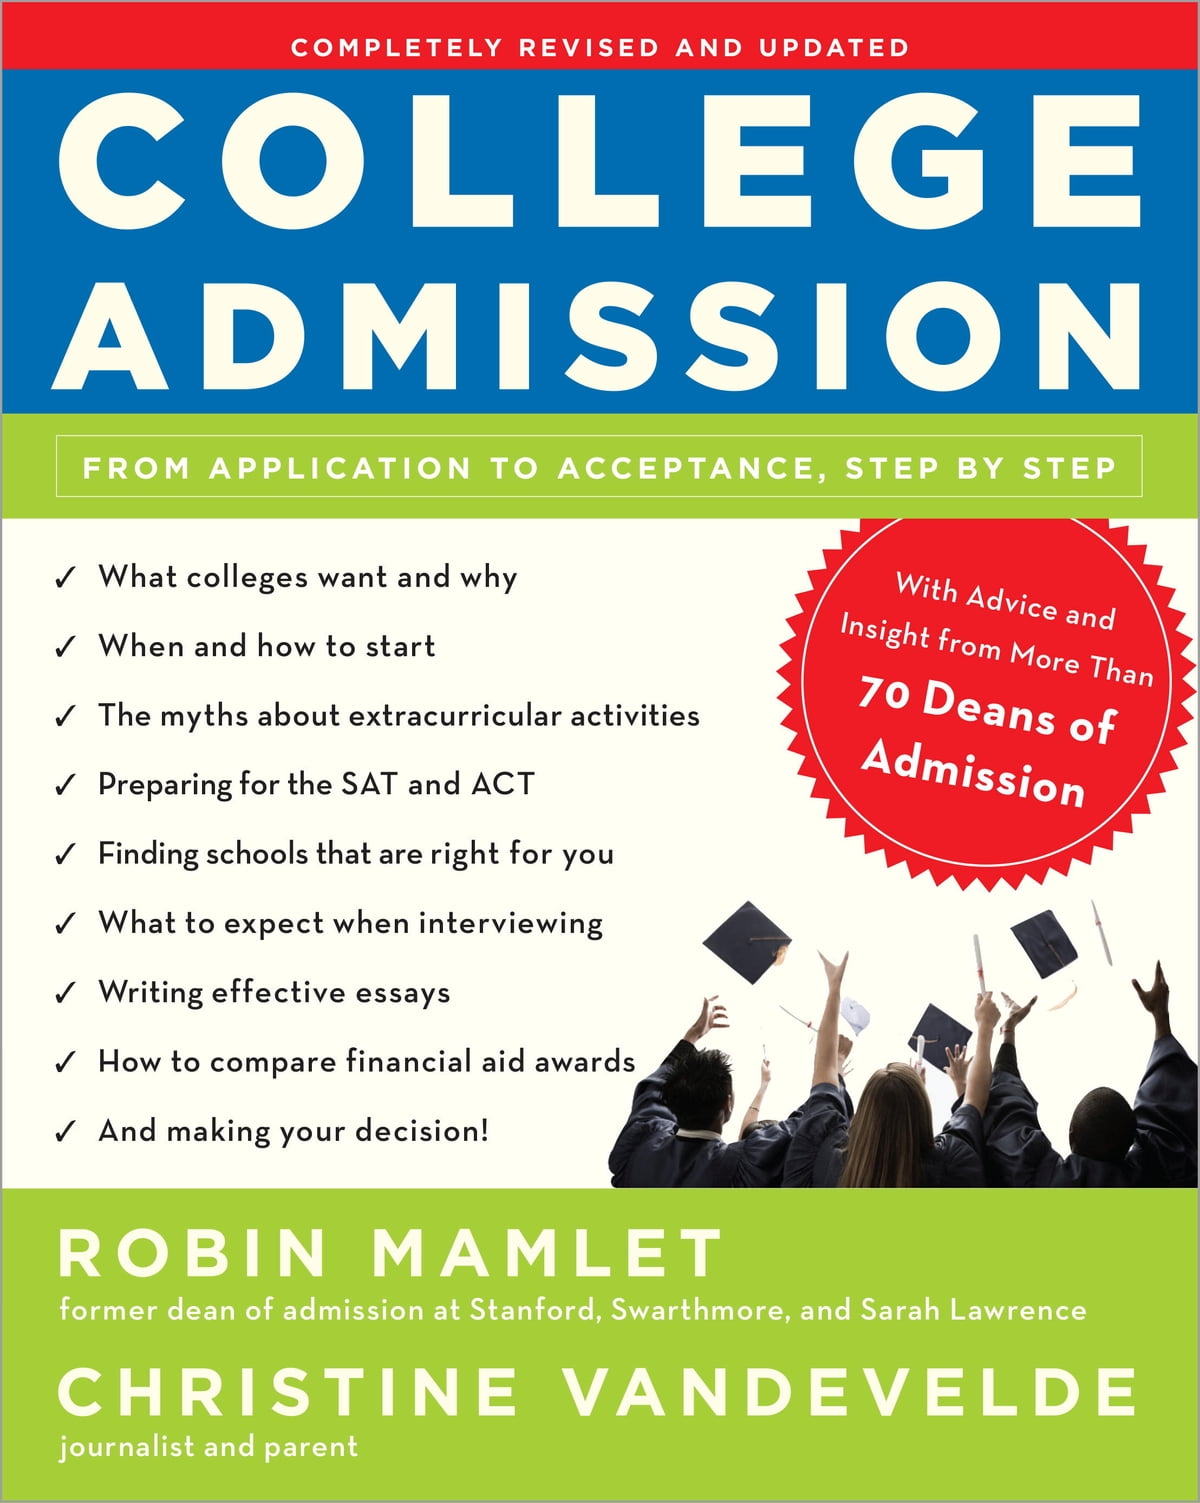 Demystifying the College Admission Process: A Comprehensive Guide for Prospective Students